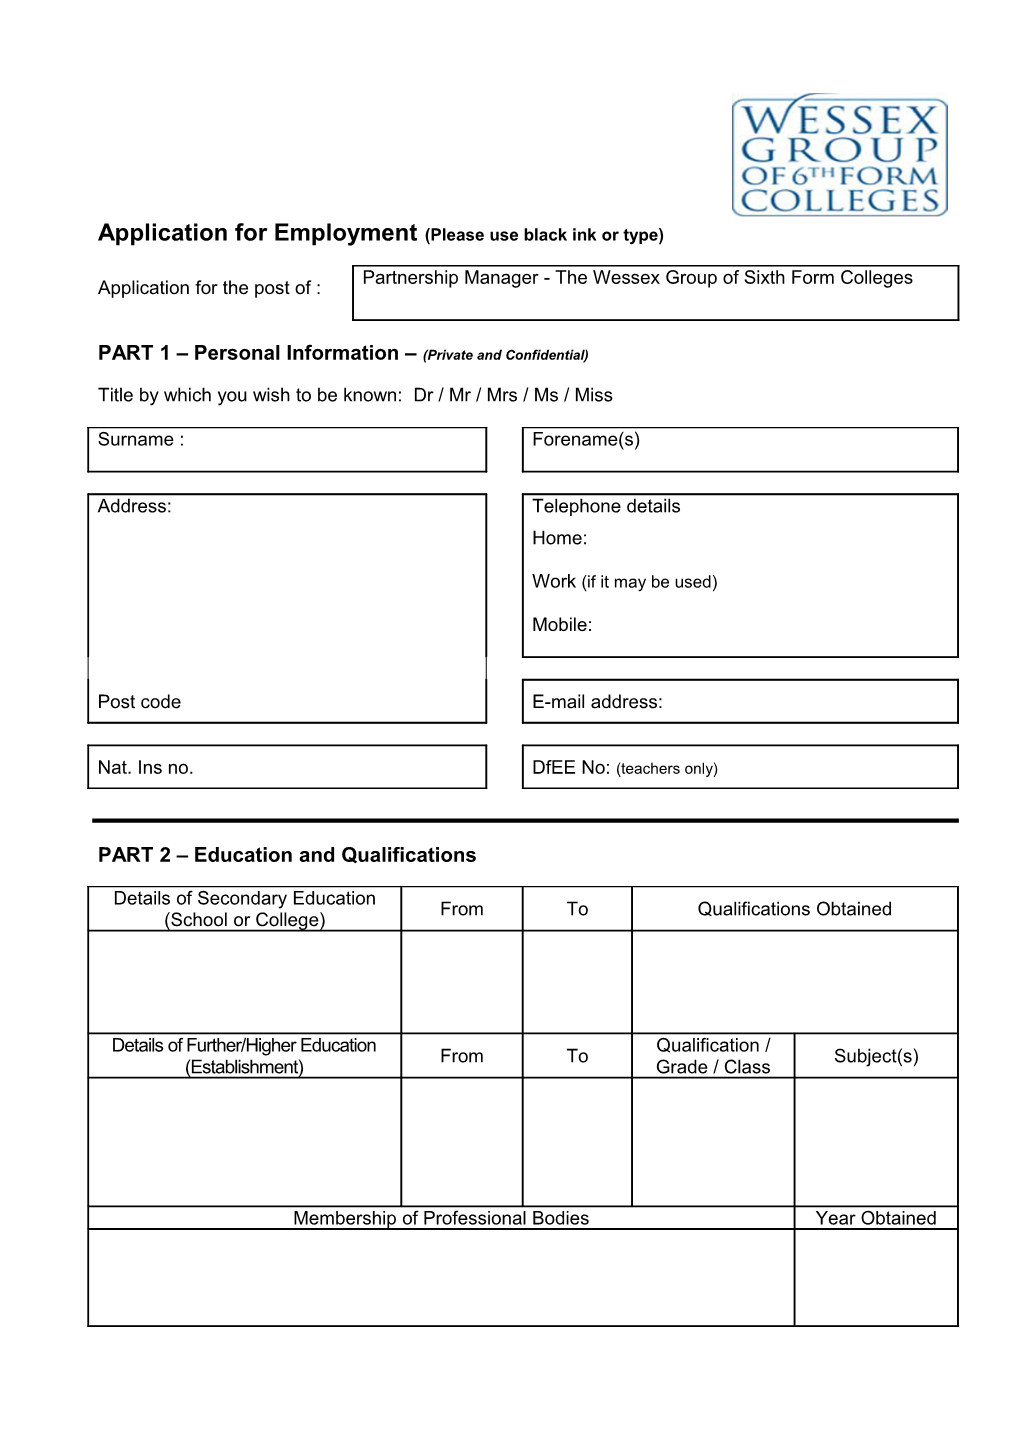 Application for Support Staff Appointment s1